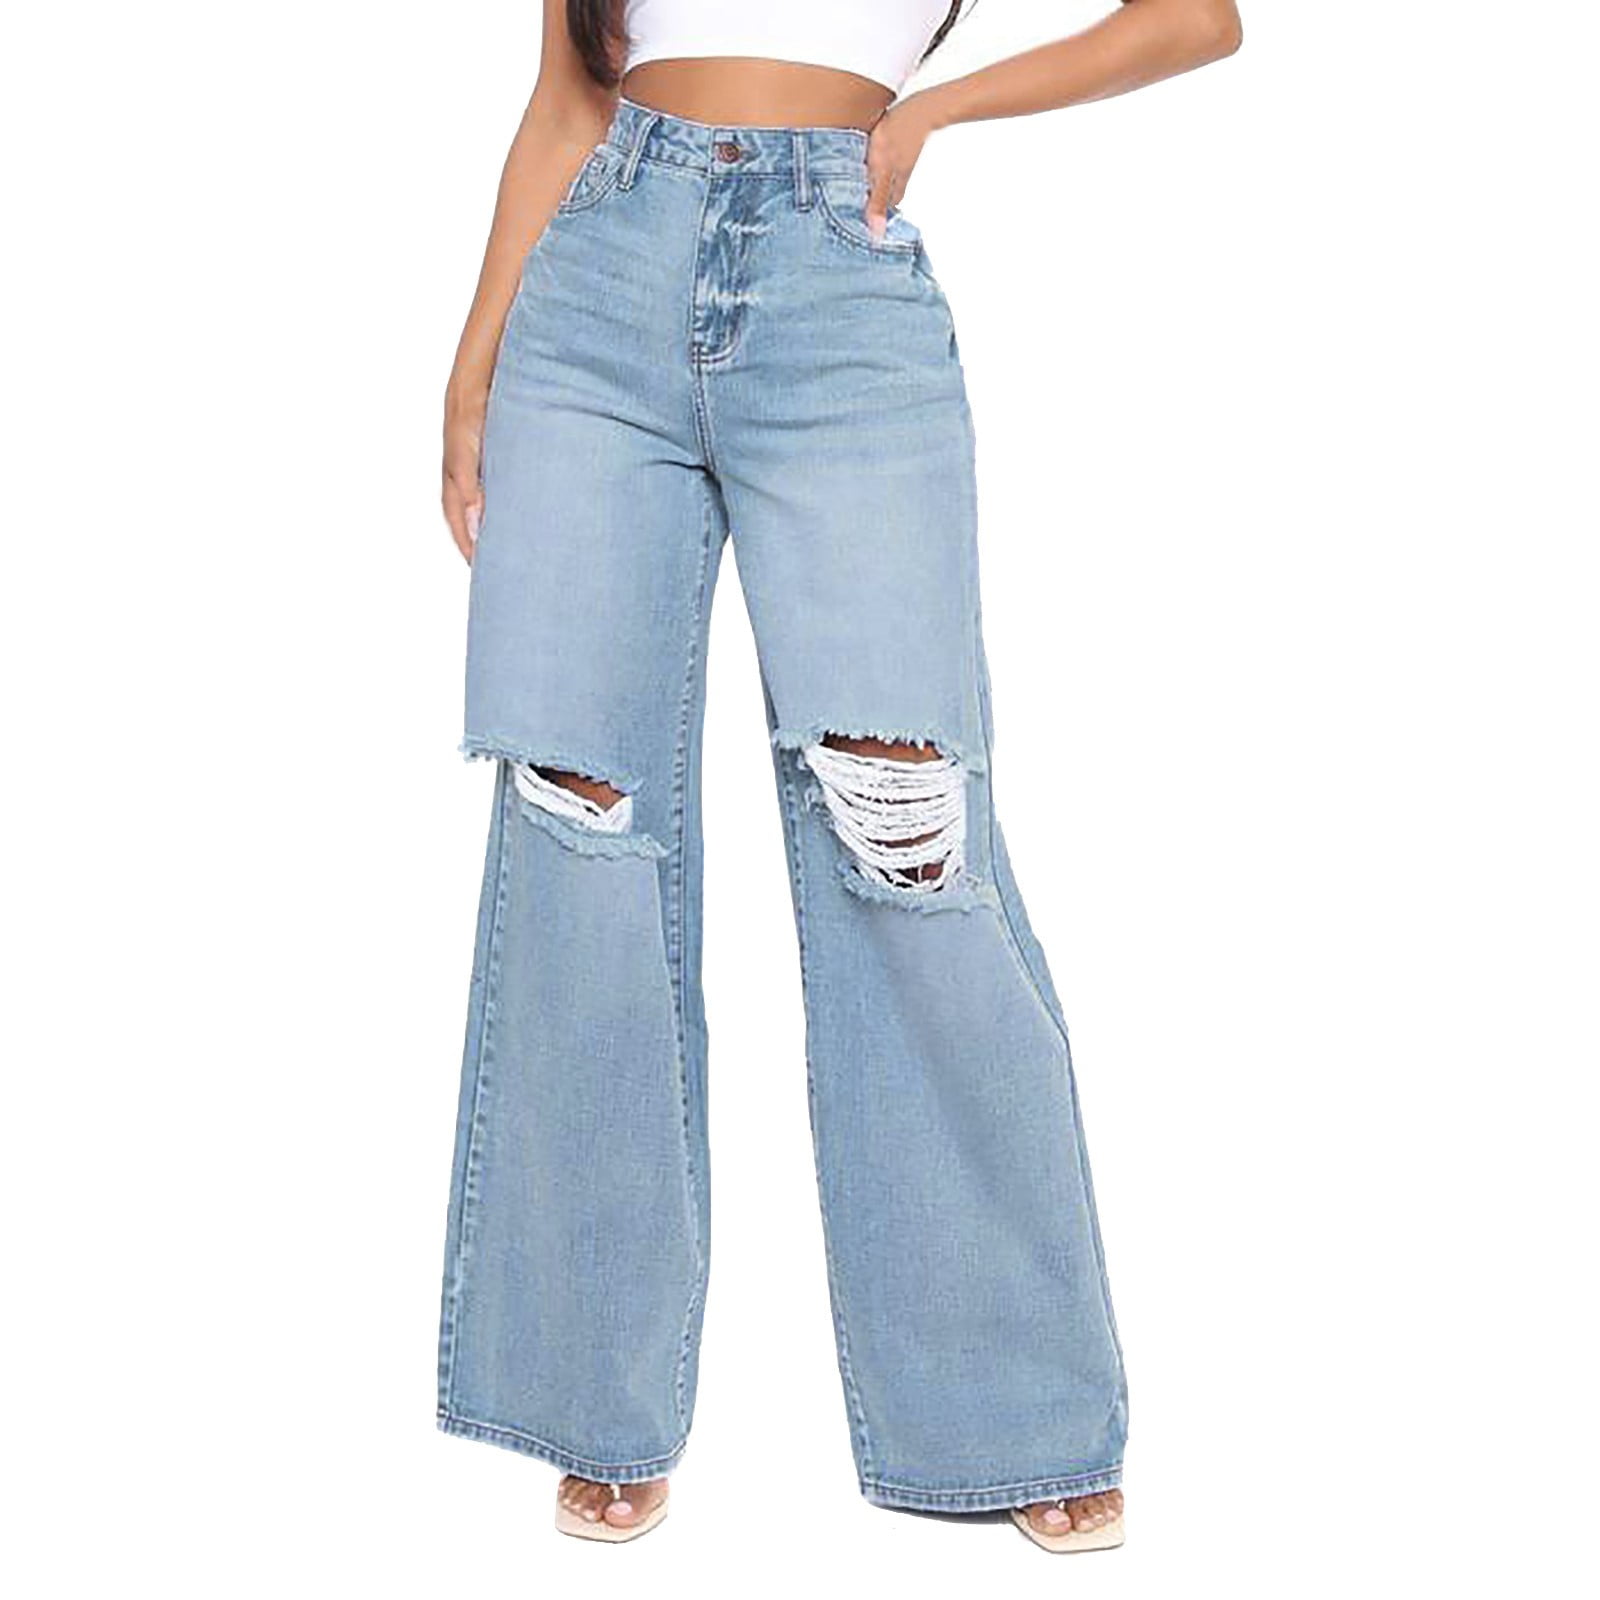 ZIZOCWA Light Blue Washed Ripped Straight Legs Jeans Women Levies